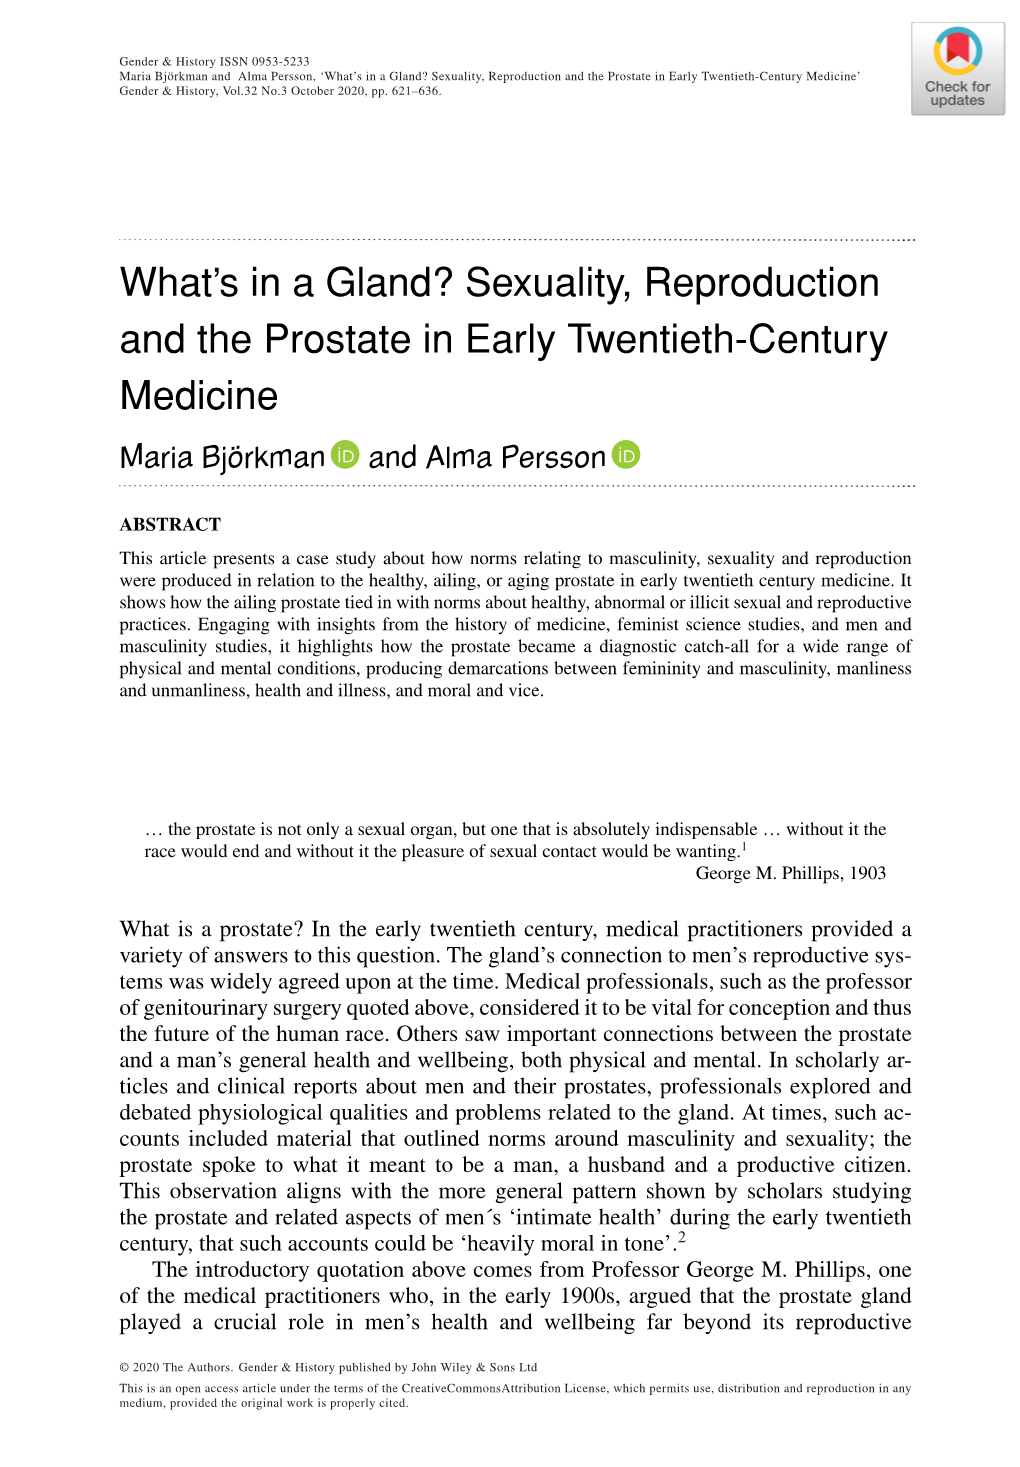 Sexuality, Reproduction and the Prostate in Early Twentieth‐Century